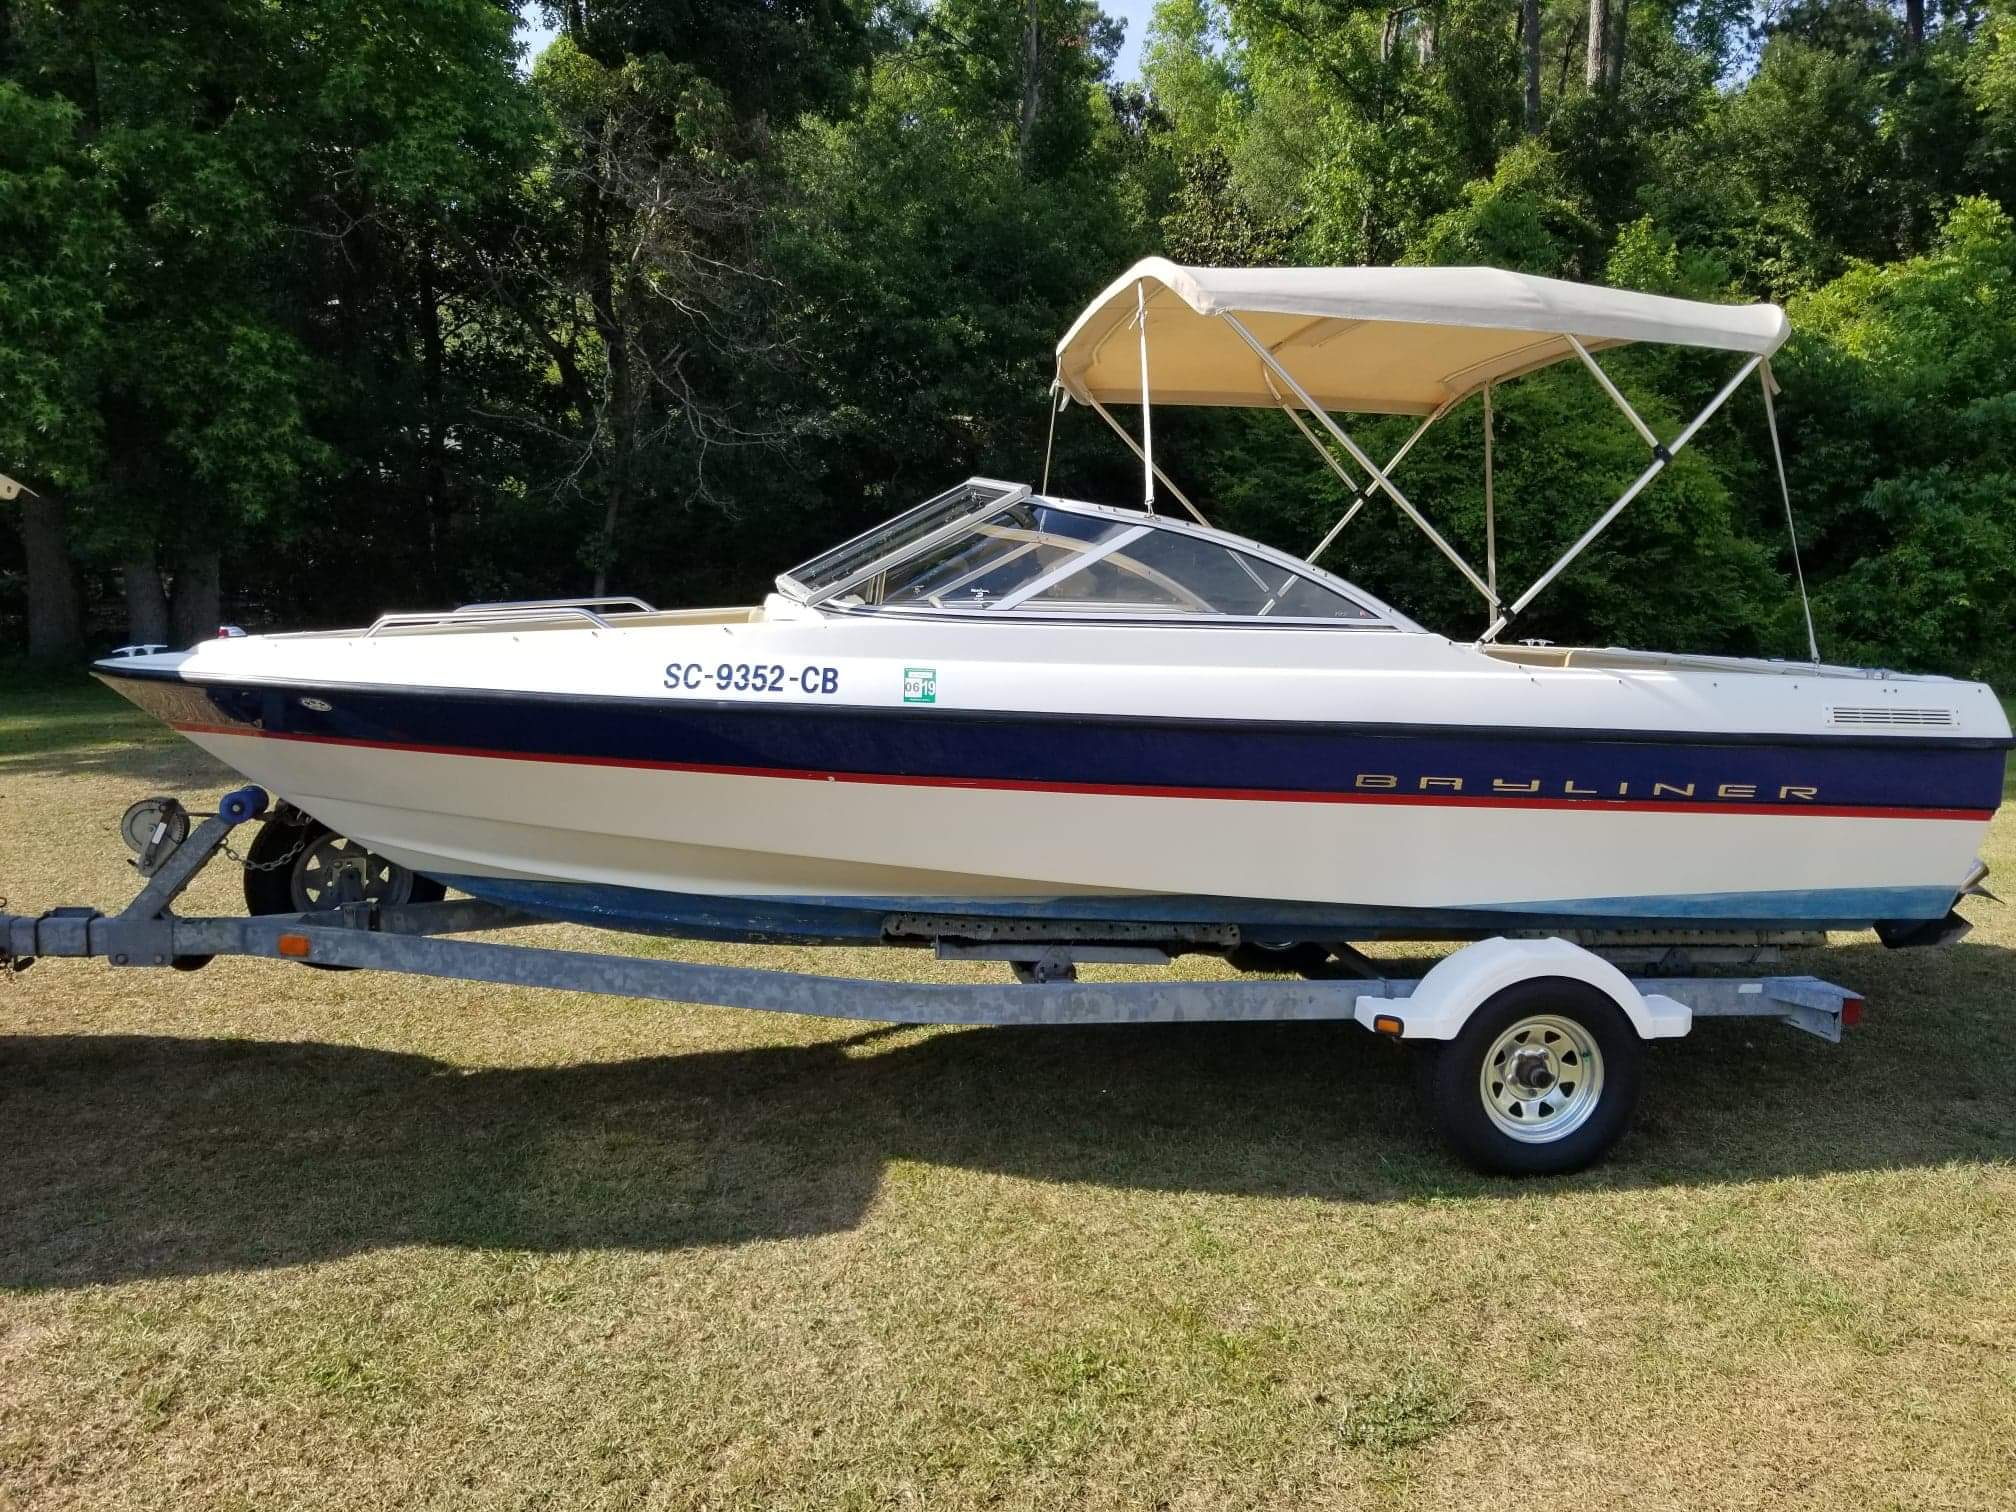 2004 19 foot Other Bayliner Power boat for sale in Myrtle Beach, SC - image 8 